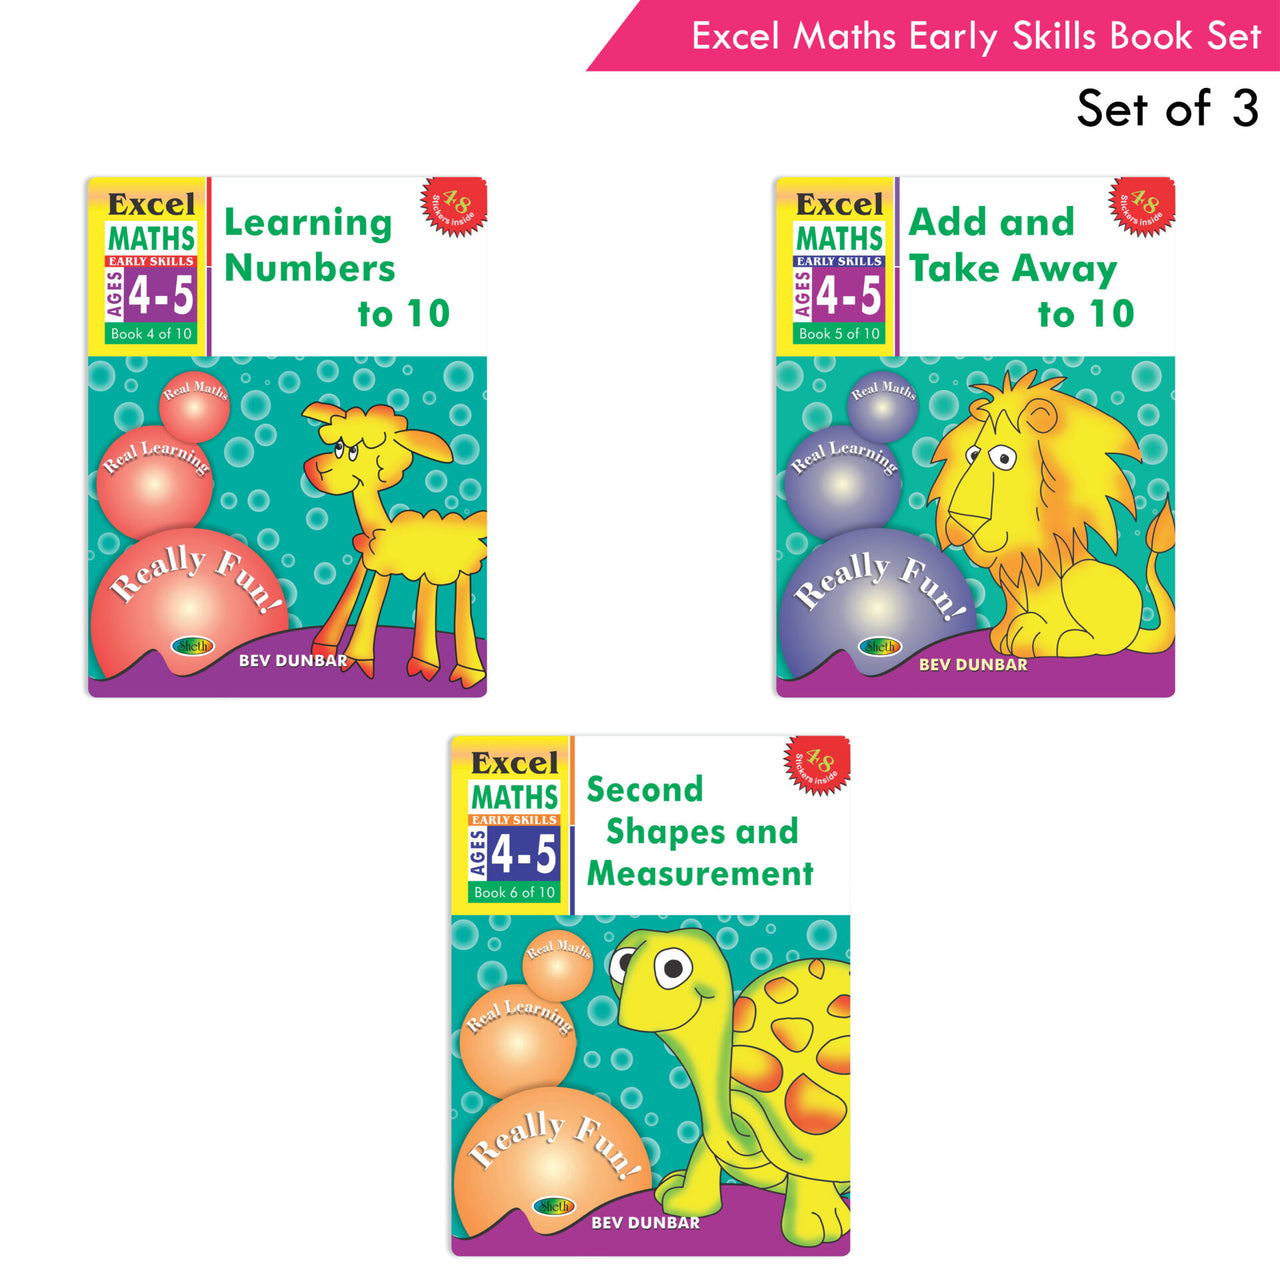 Excel Maths Early Skills Ages 4-5 Year Books for Junior kg| Set of 3| Learn Numbers Add & Take Away, Shapes, Measurement - Distacart